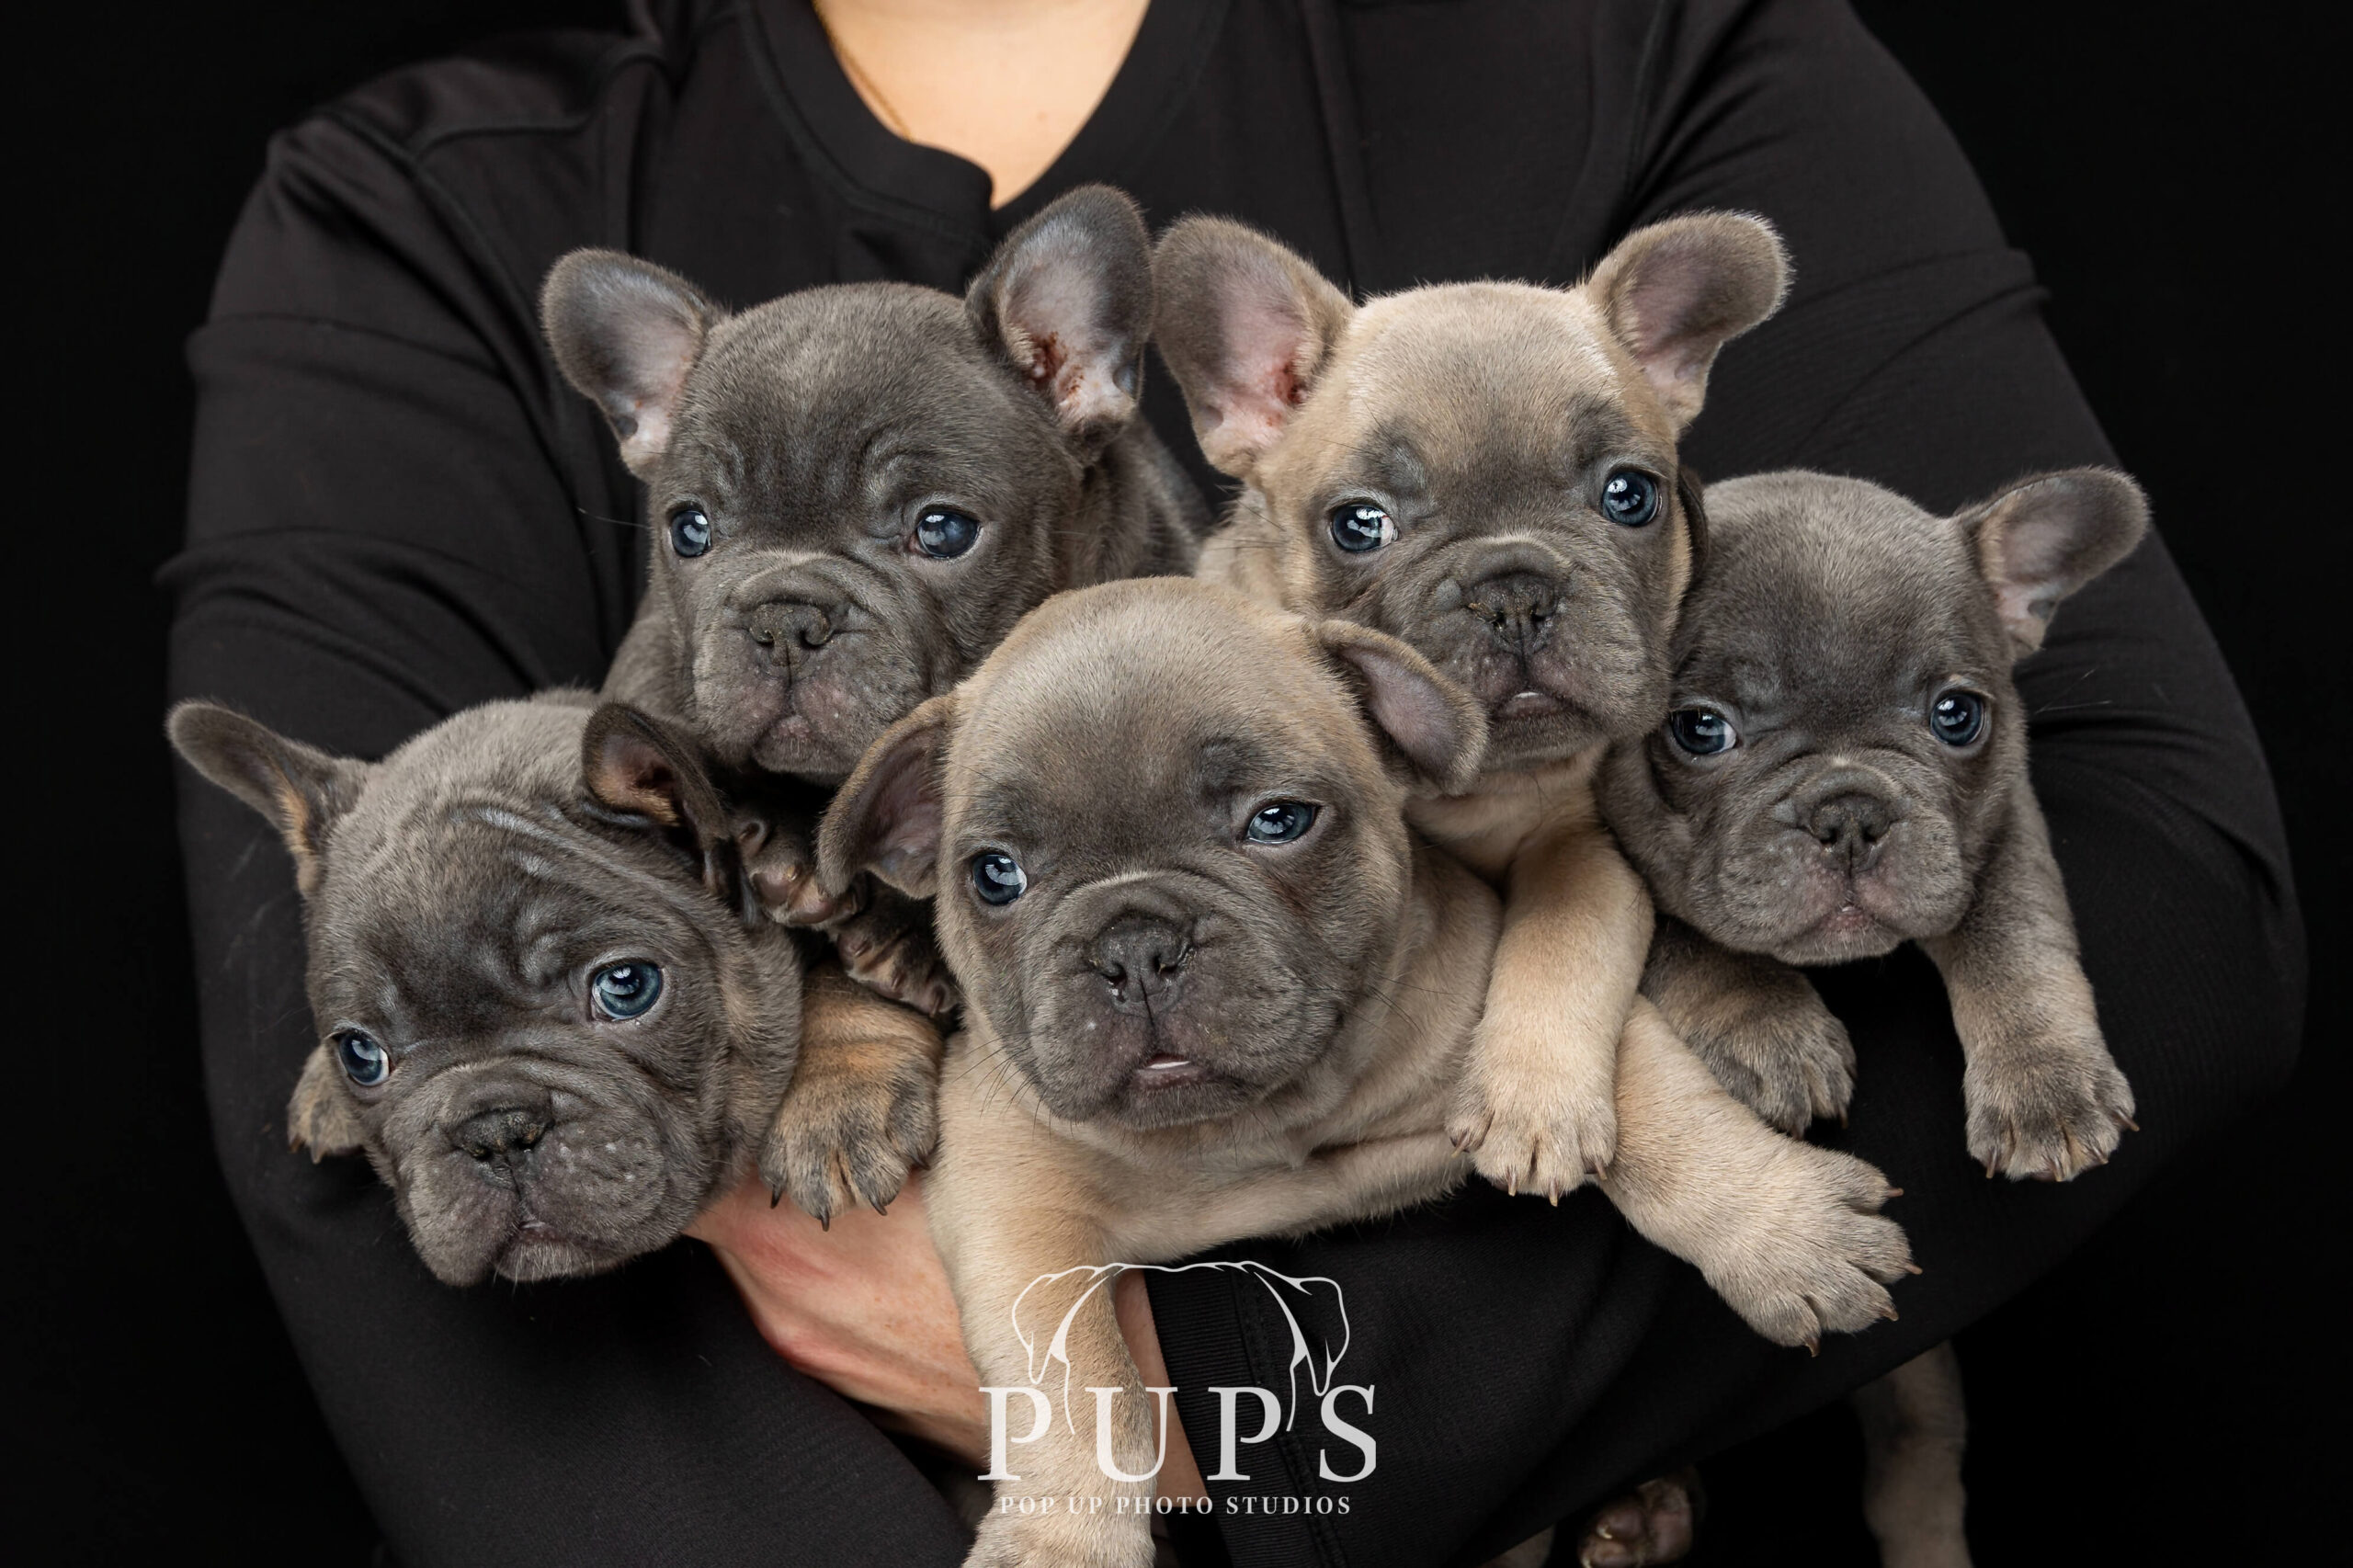 5 baby french bulldog puppies being held in portrait with black background